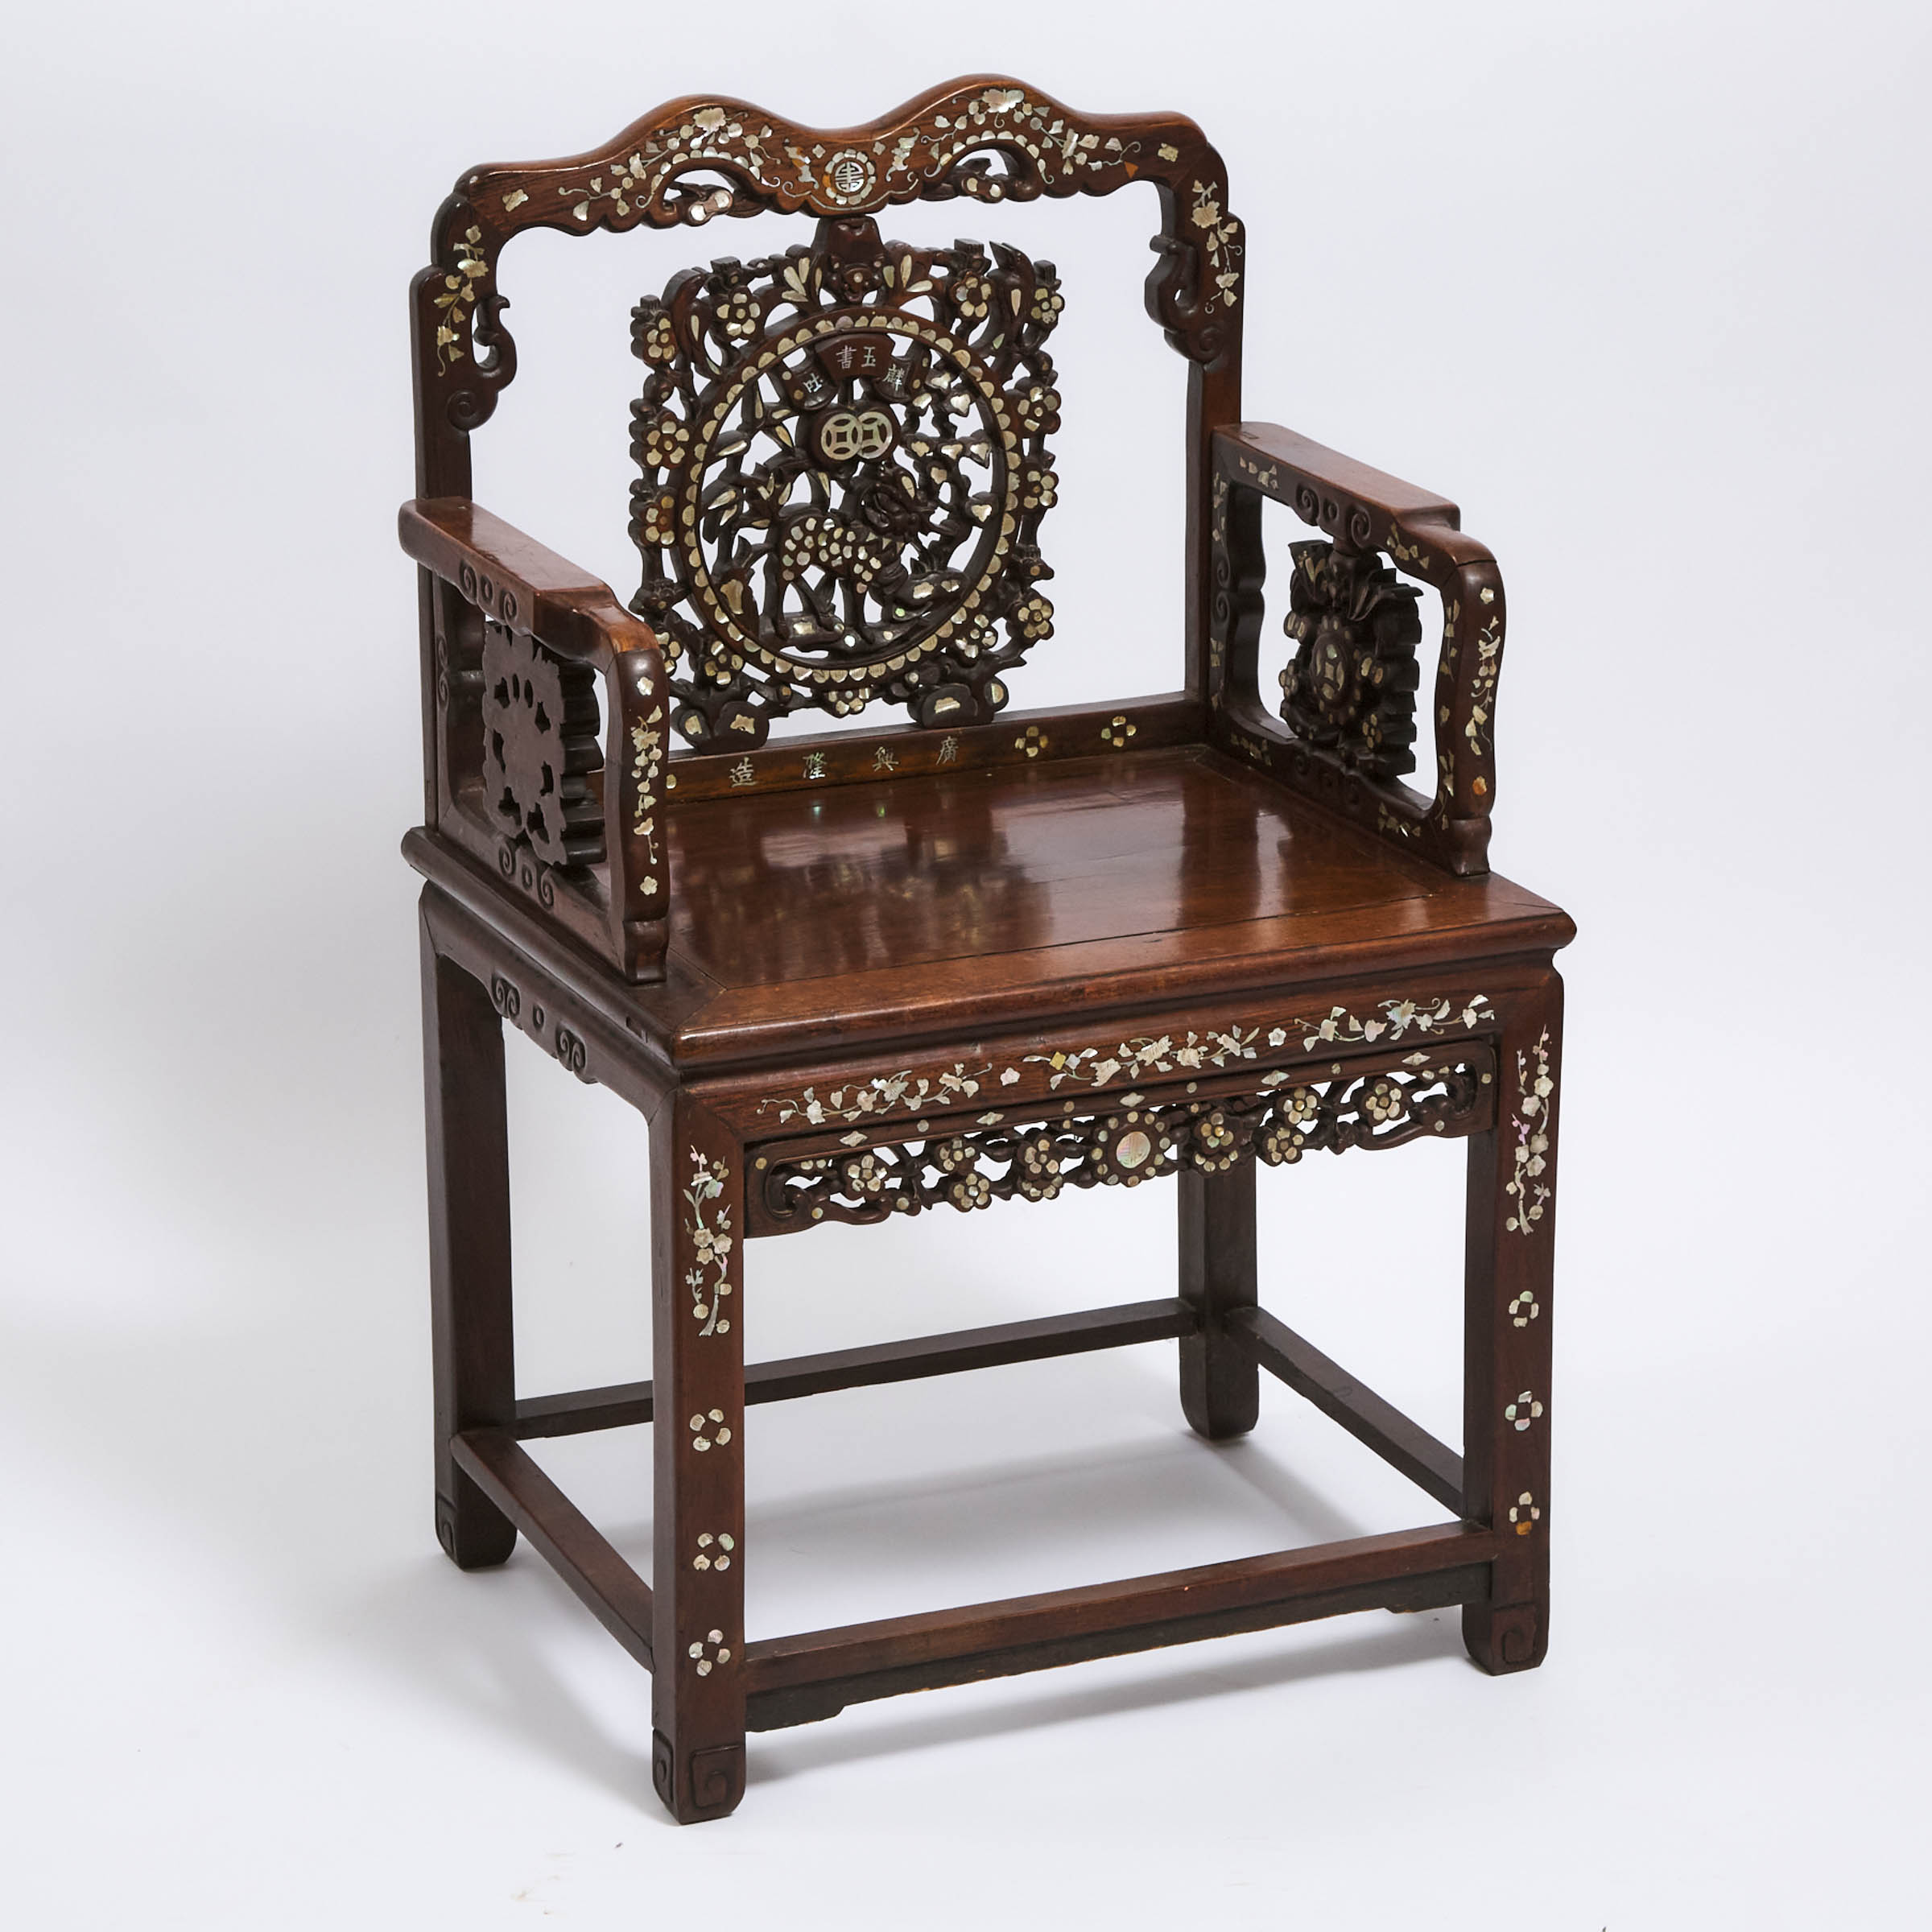 A Mother-of-Pearl Inlaid Rosewood Chair, Late Qing/Republican Period